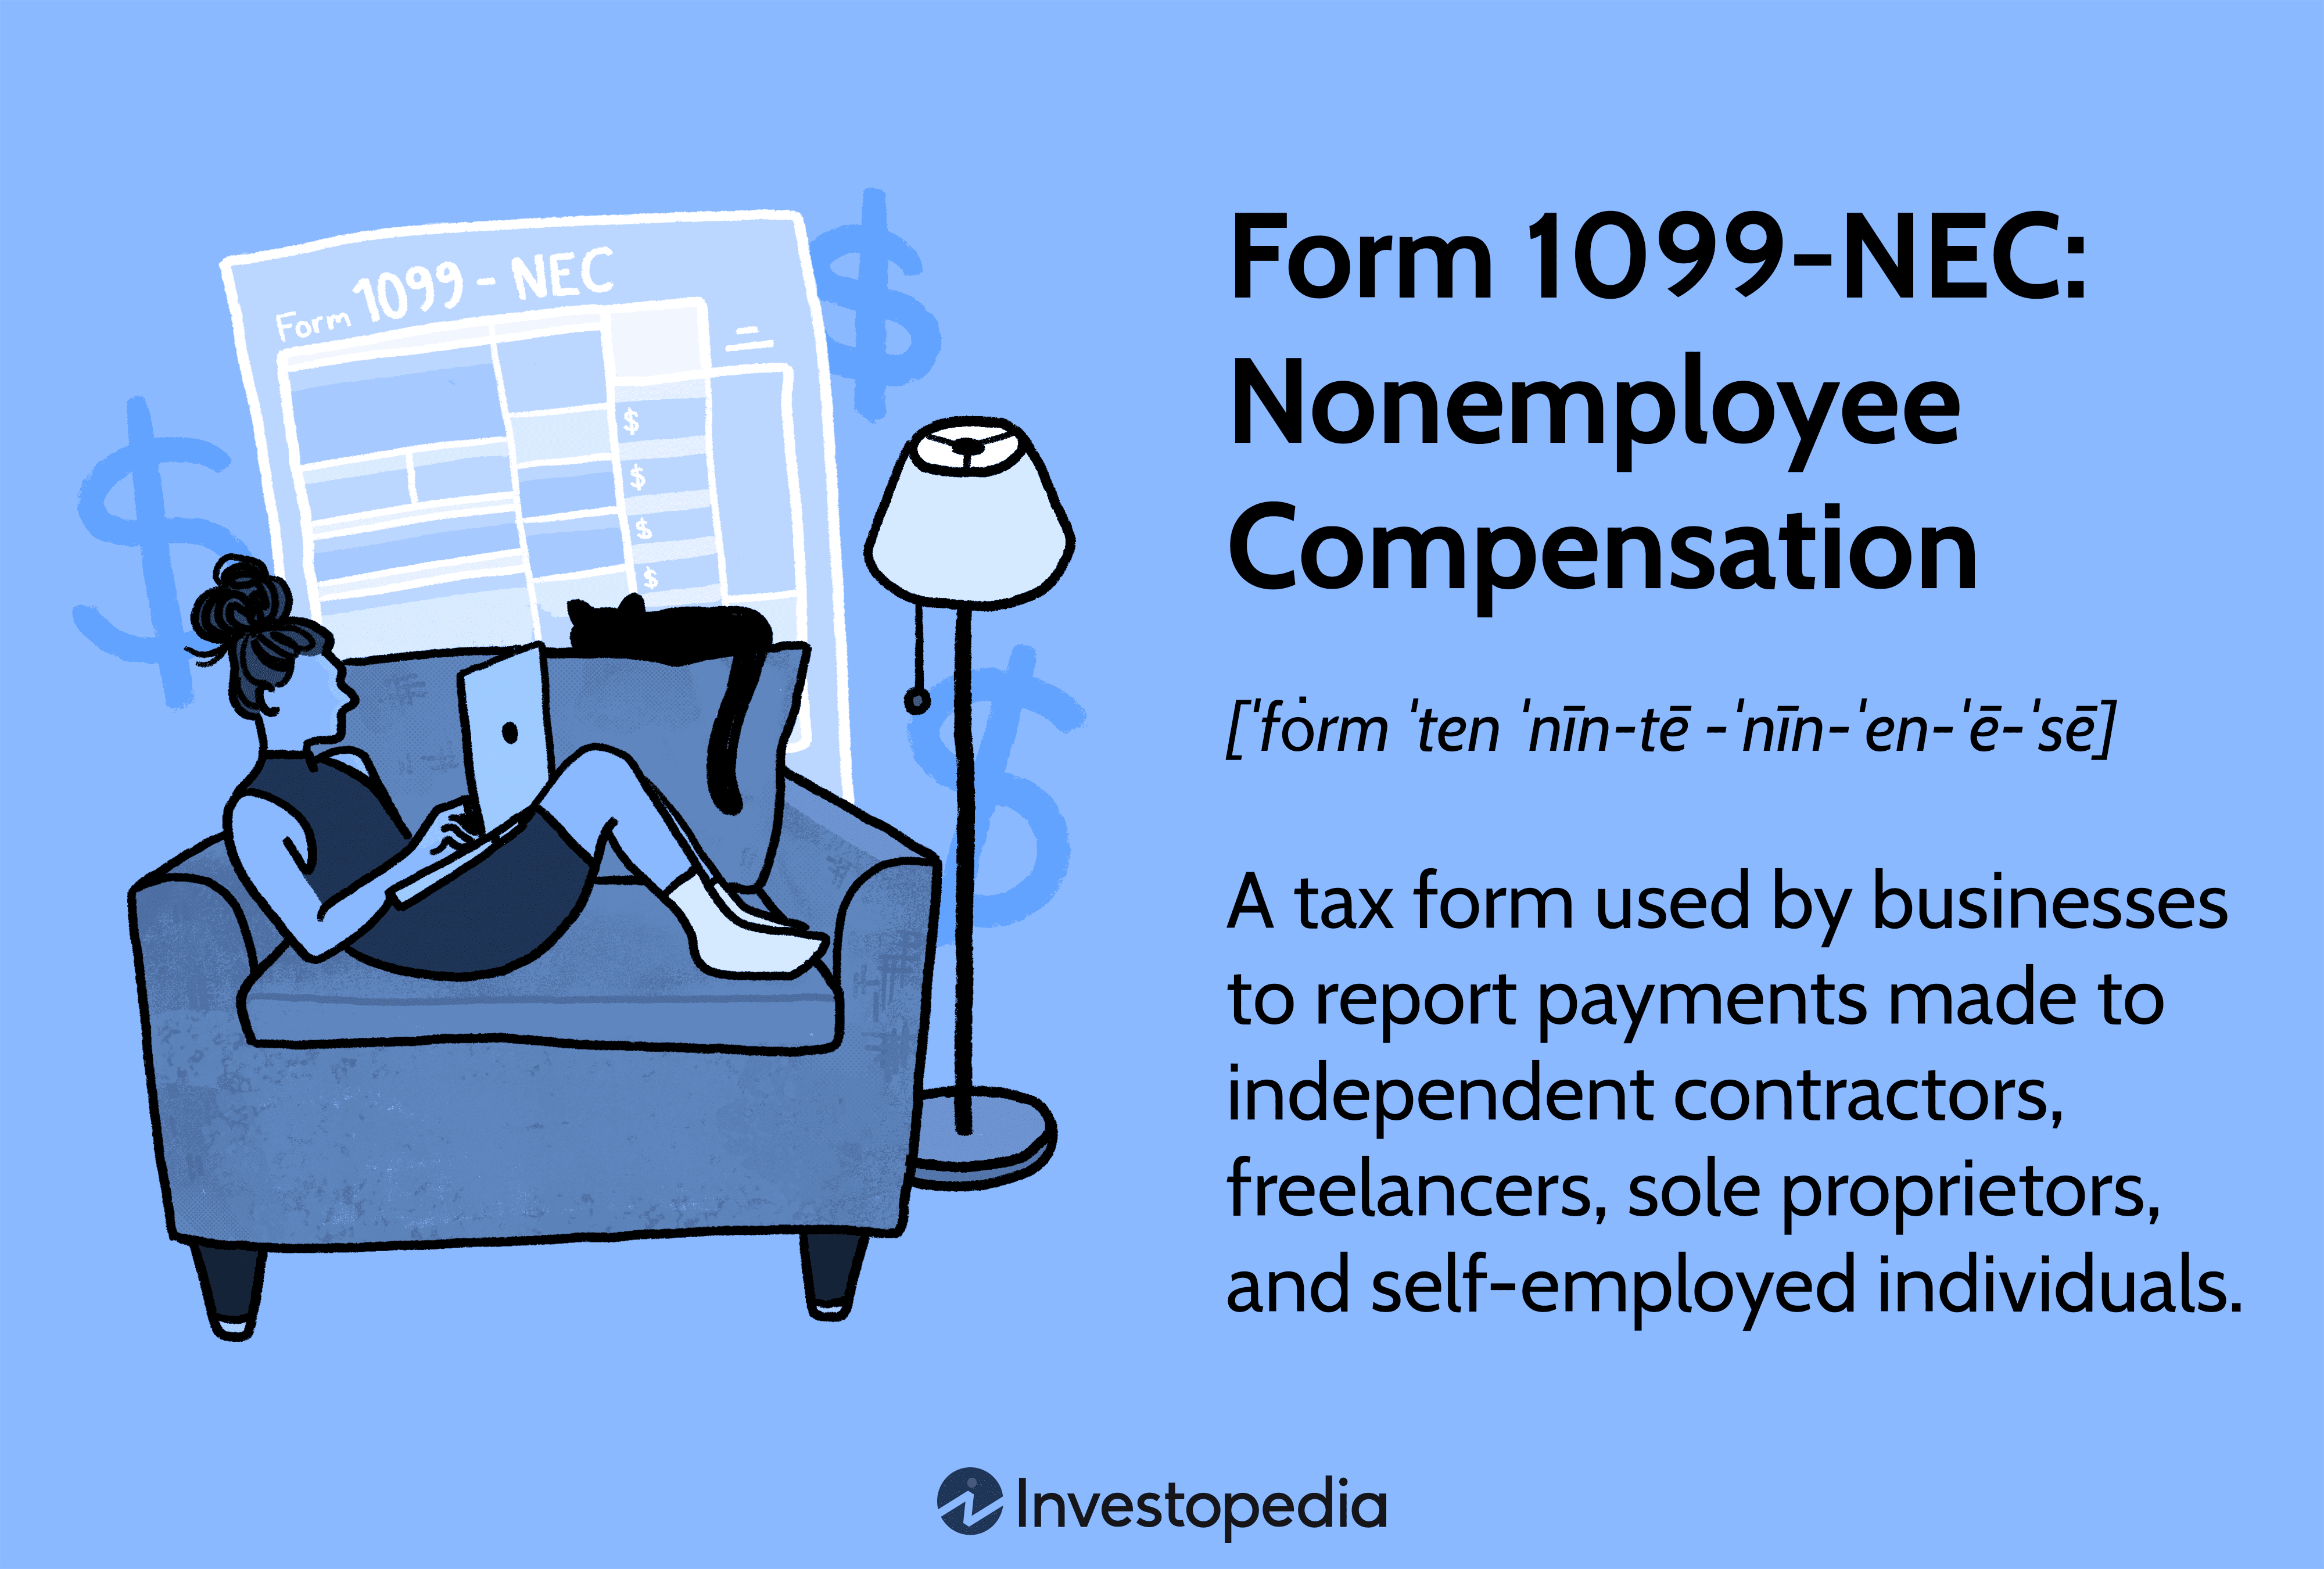 Form 1099-NEC: Nonemployee Compensation: A tax form used by businesses to report payments made to independent contractors, freelancers, sole proprietors, and self-employed individuals.